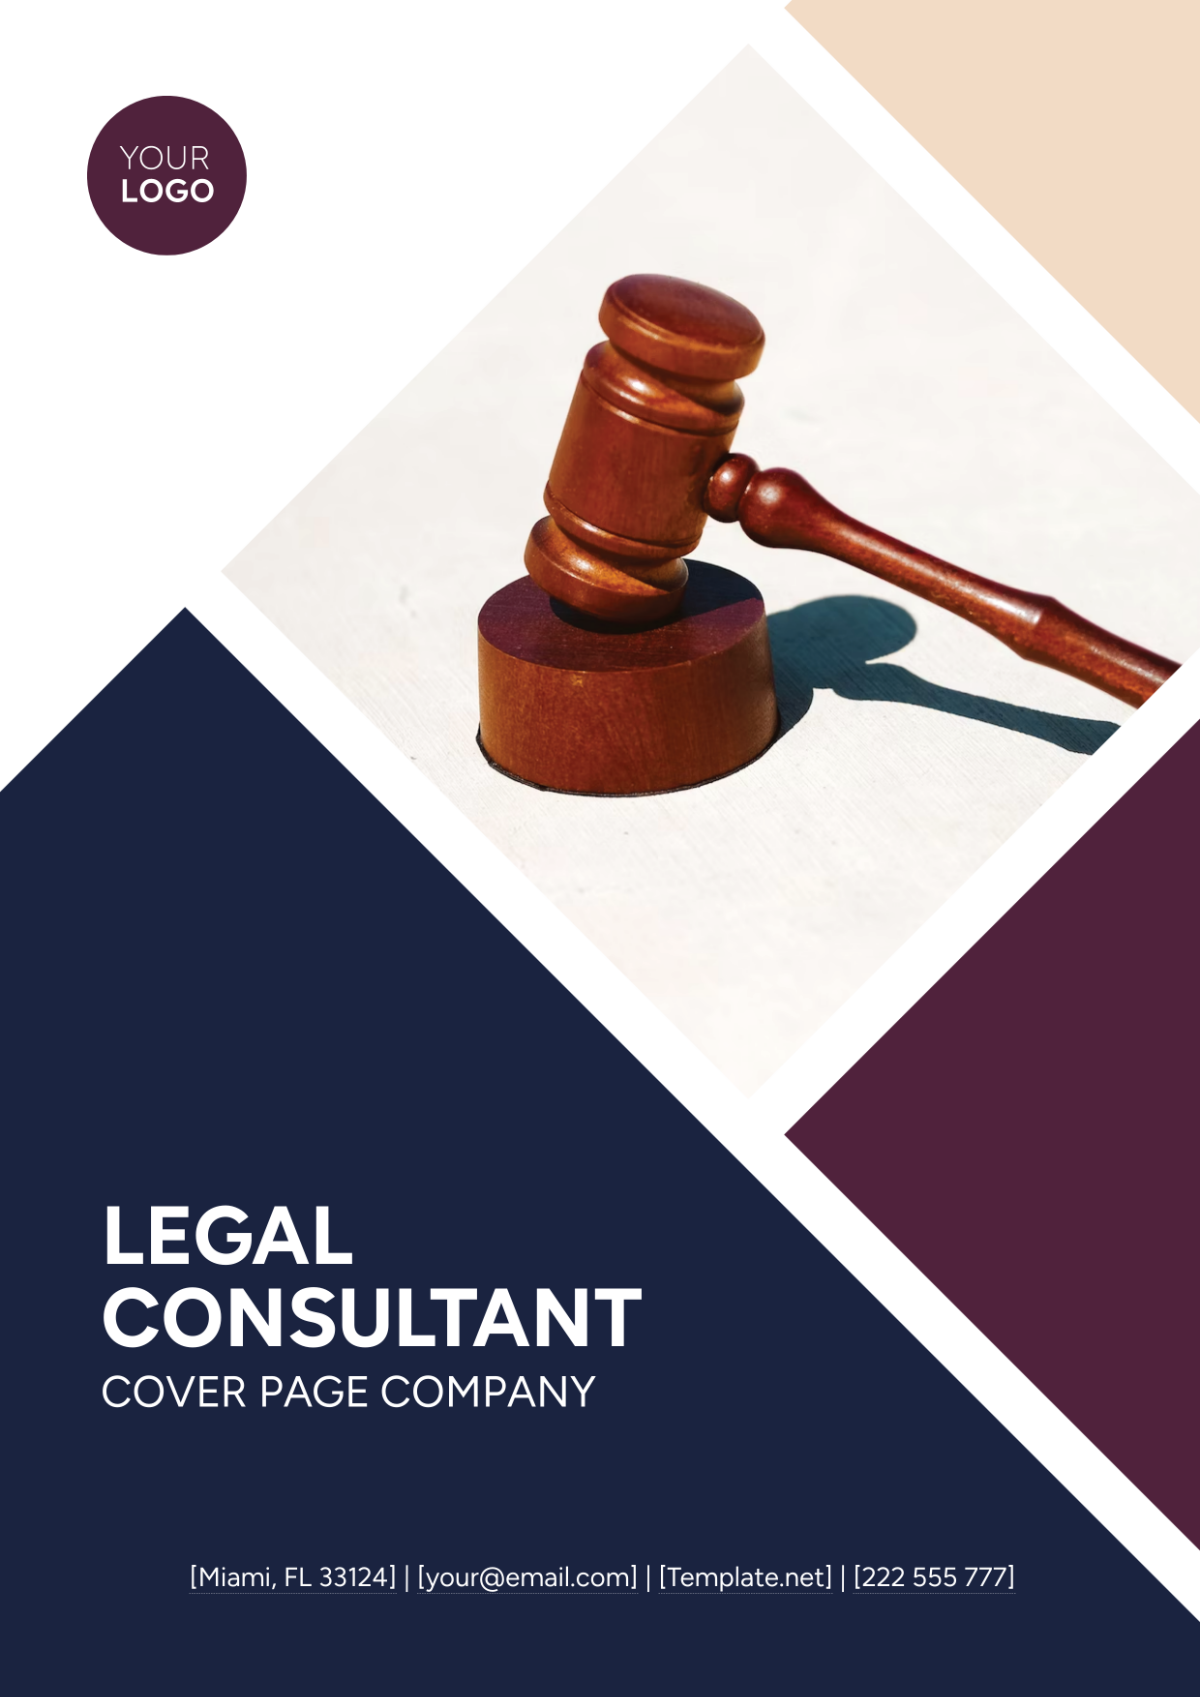 Legal Consultant Cover Page Company Template